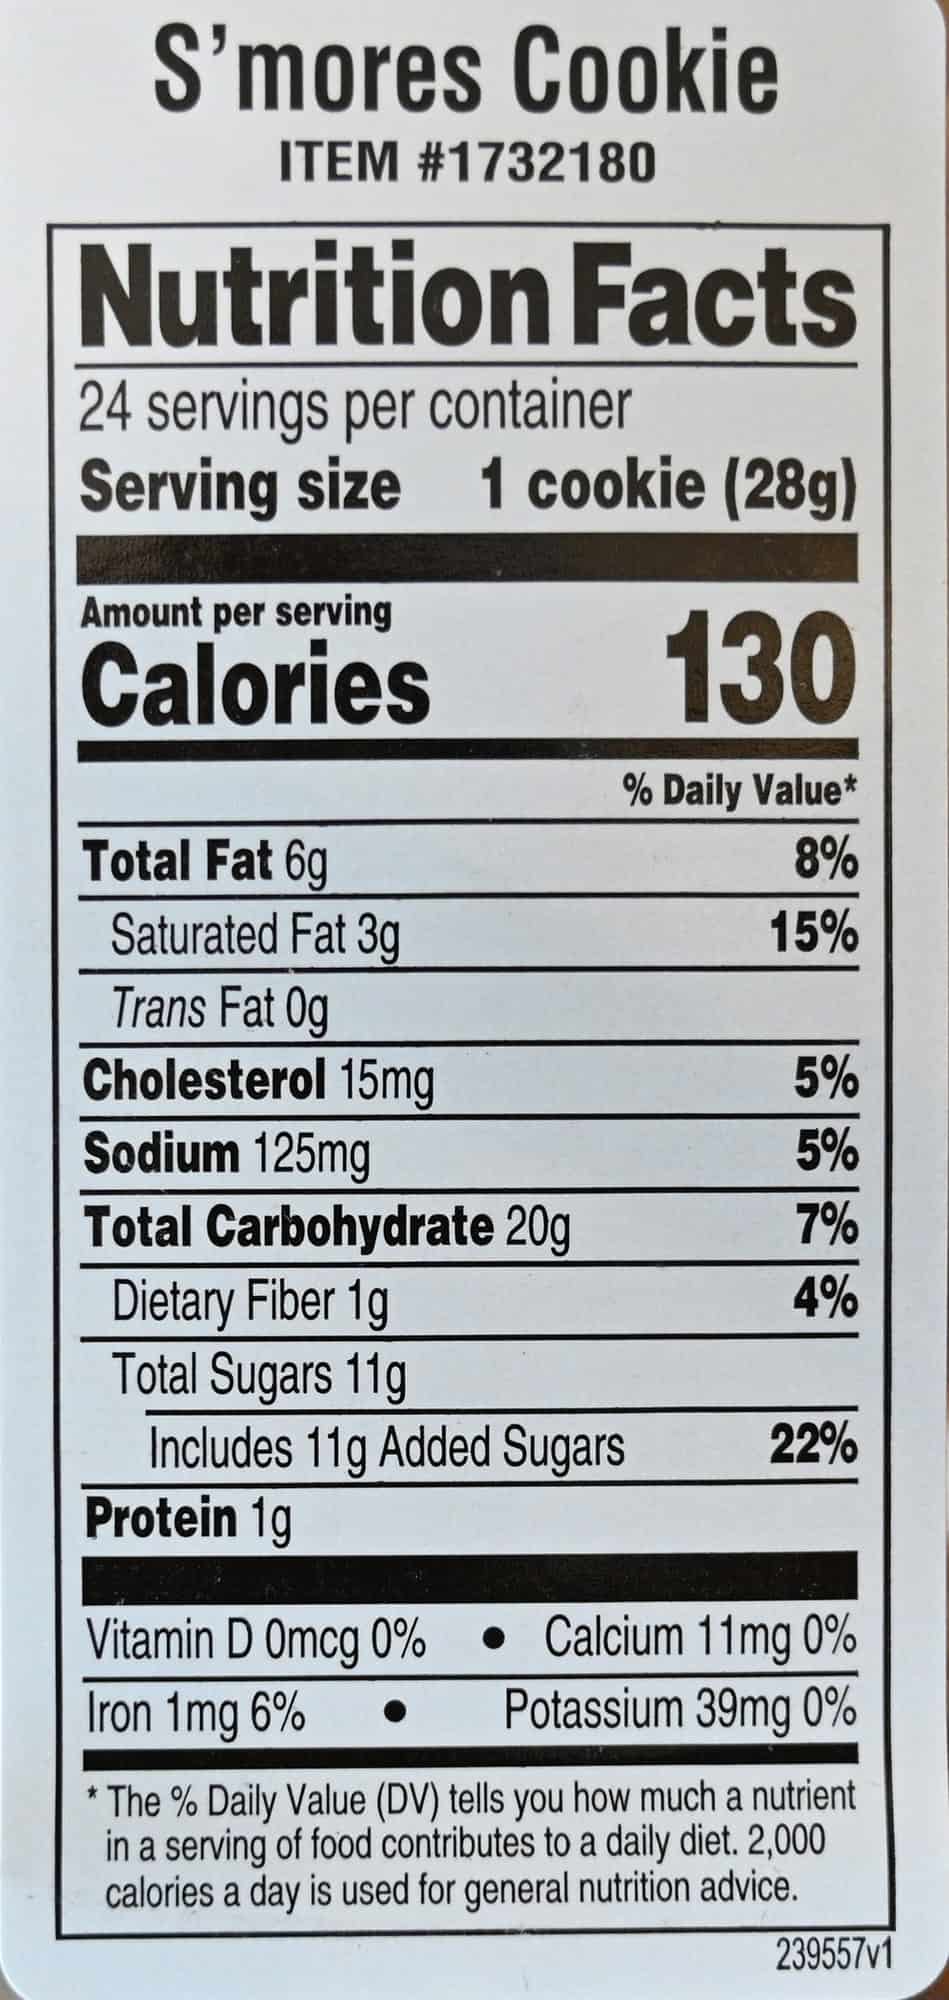 Closeup image of the nutrition facts label for the cookies from the container.